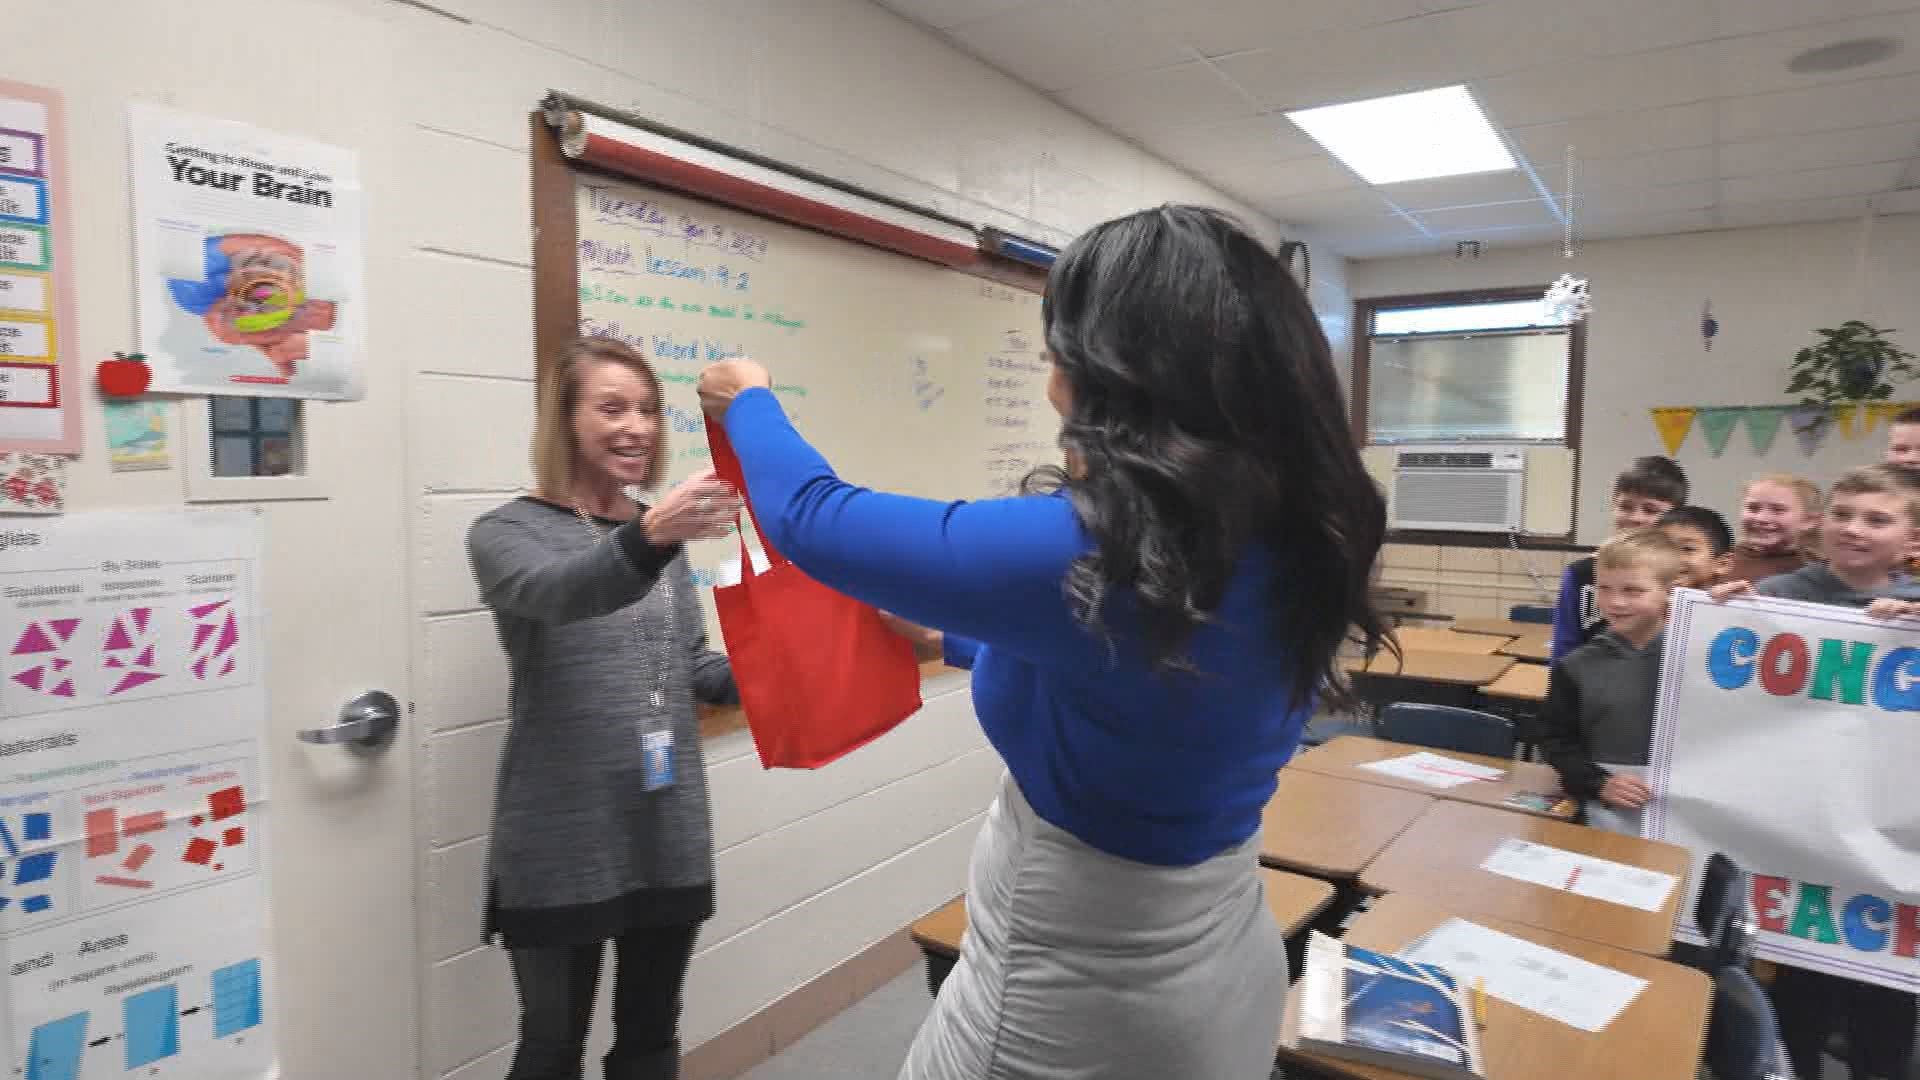 Teacher of the Week Bobbie Wash said, “Absolutely amazing, this is a shock, completely.” She said the surprise came right on time.